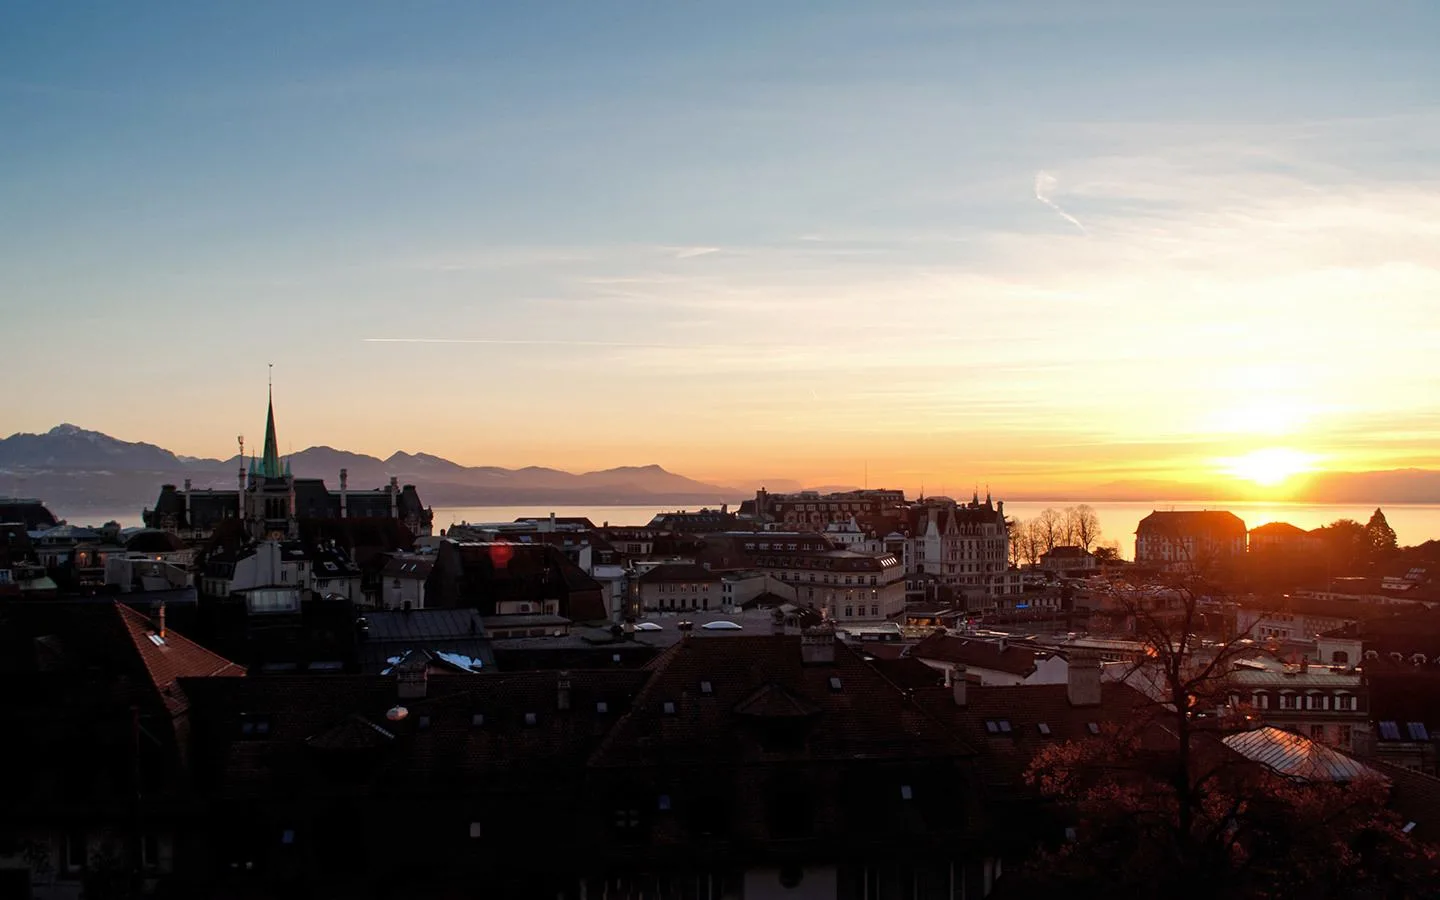 Sunset over Lausanne from outside the cathedral